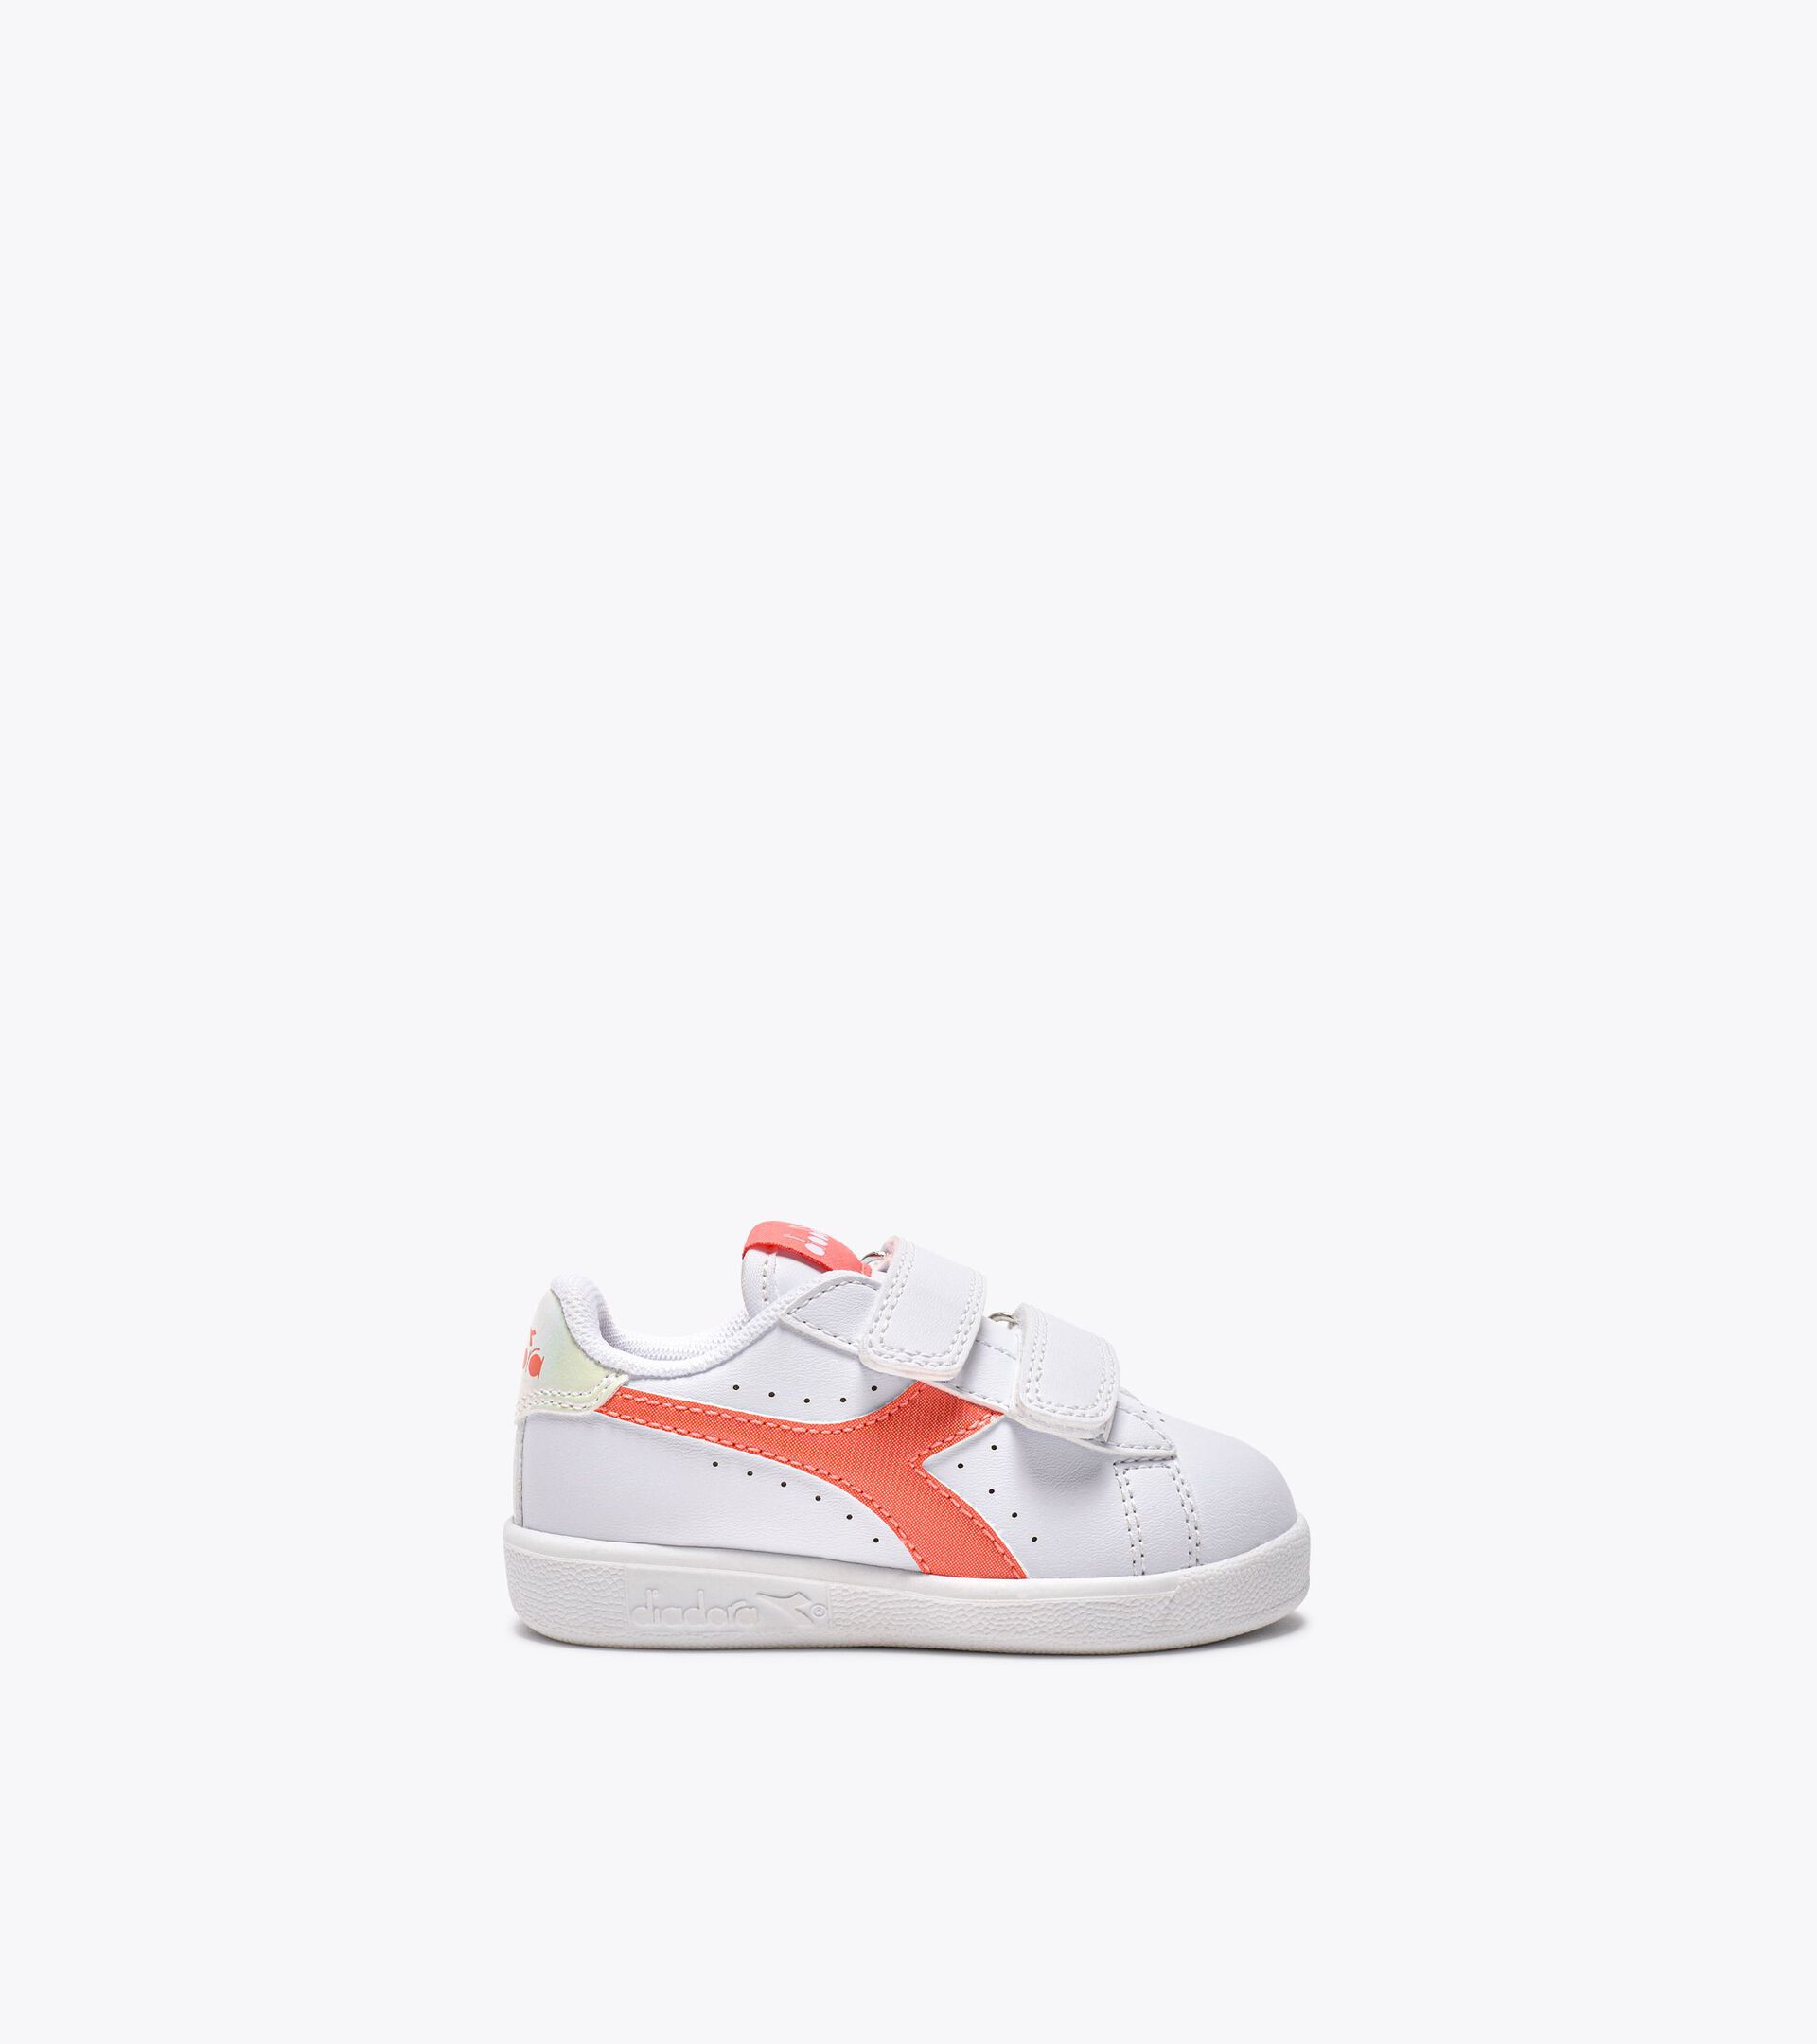 Sports shoes - Toddlers 1-4 years GAME P TD GIRL FUSION CORAL/WHITE - Diadora